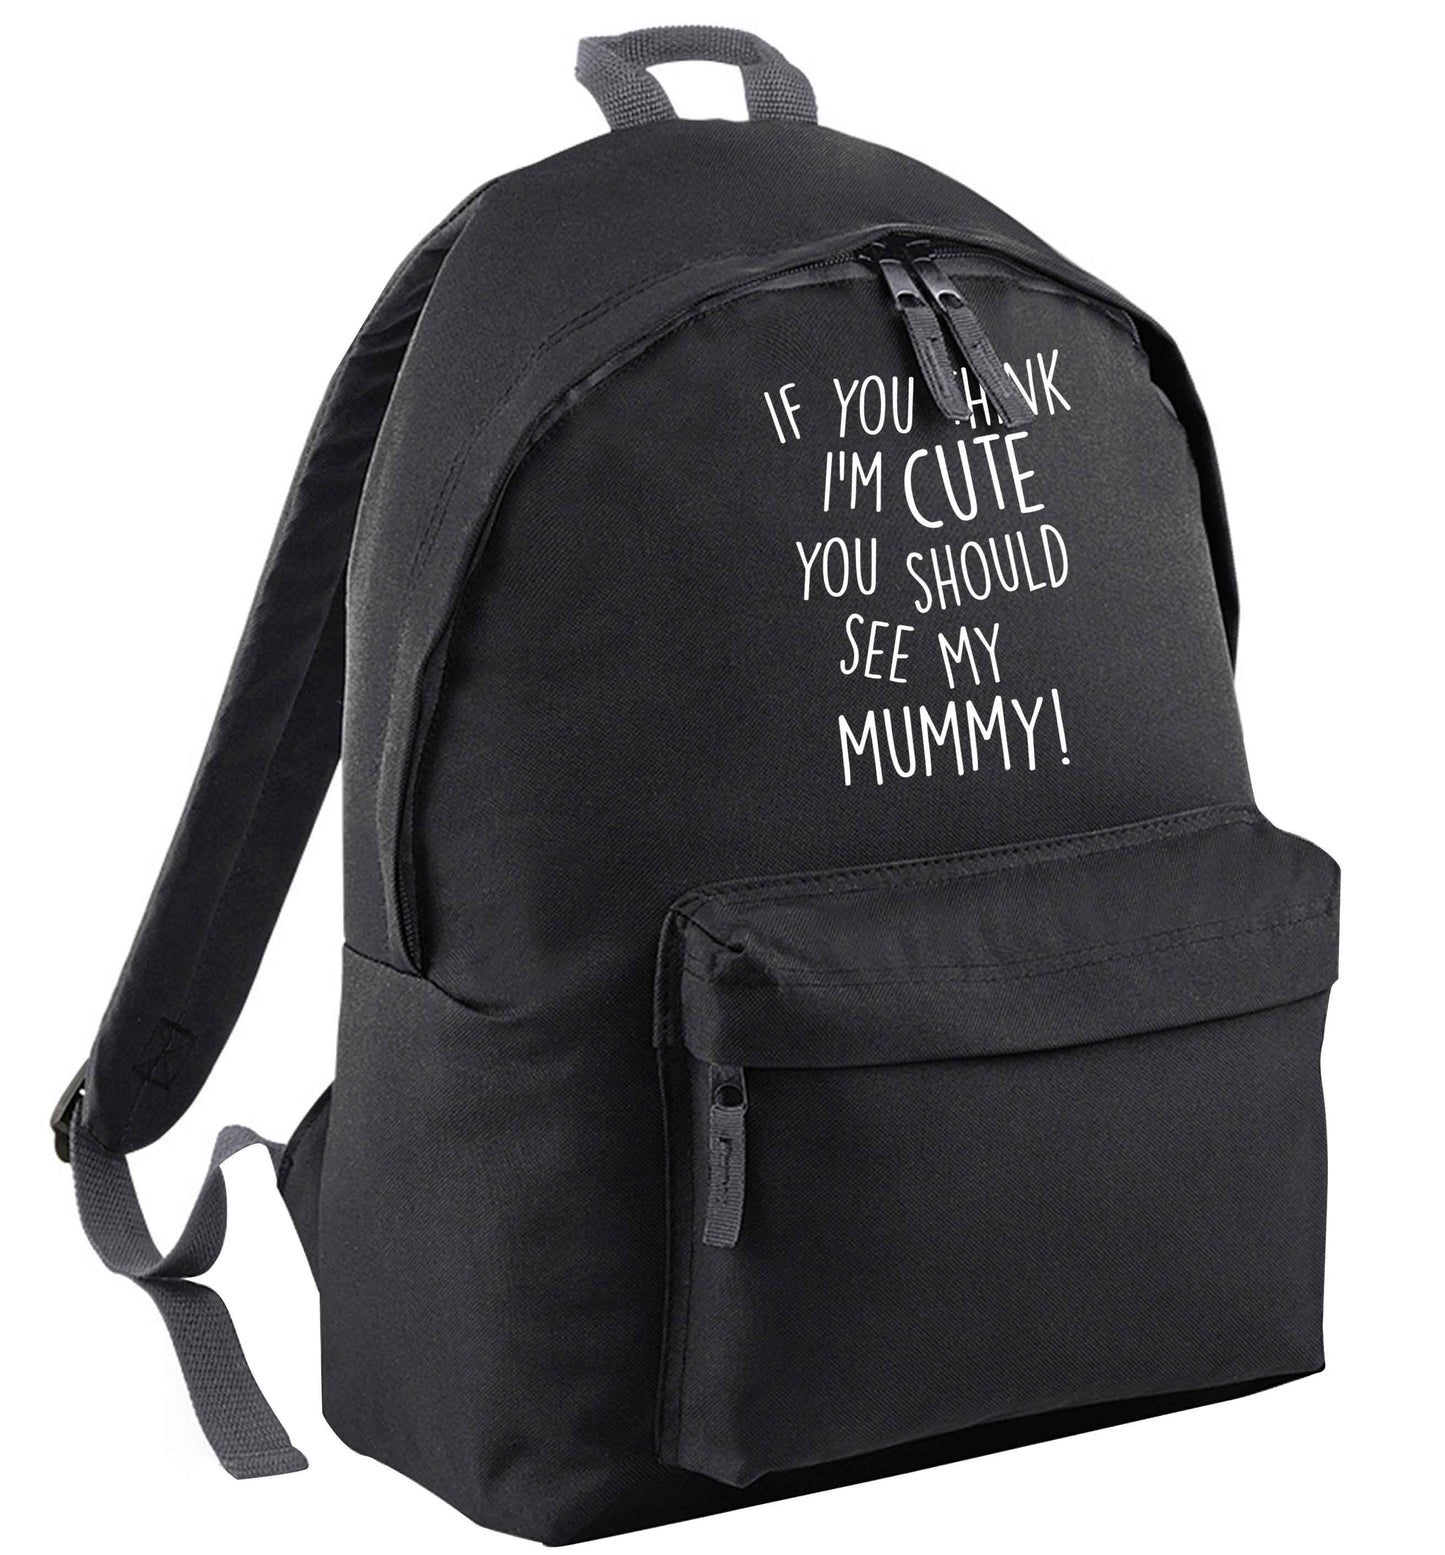 If you think I'm cute you should see my mummy | Adults backpack